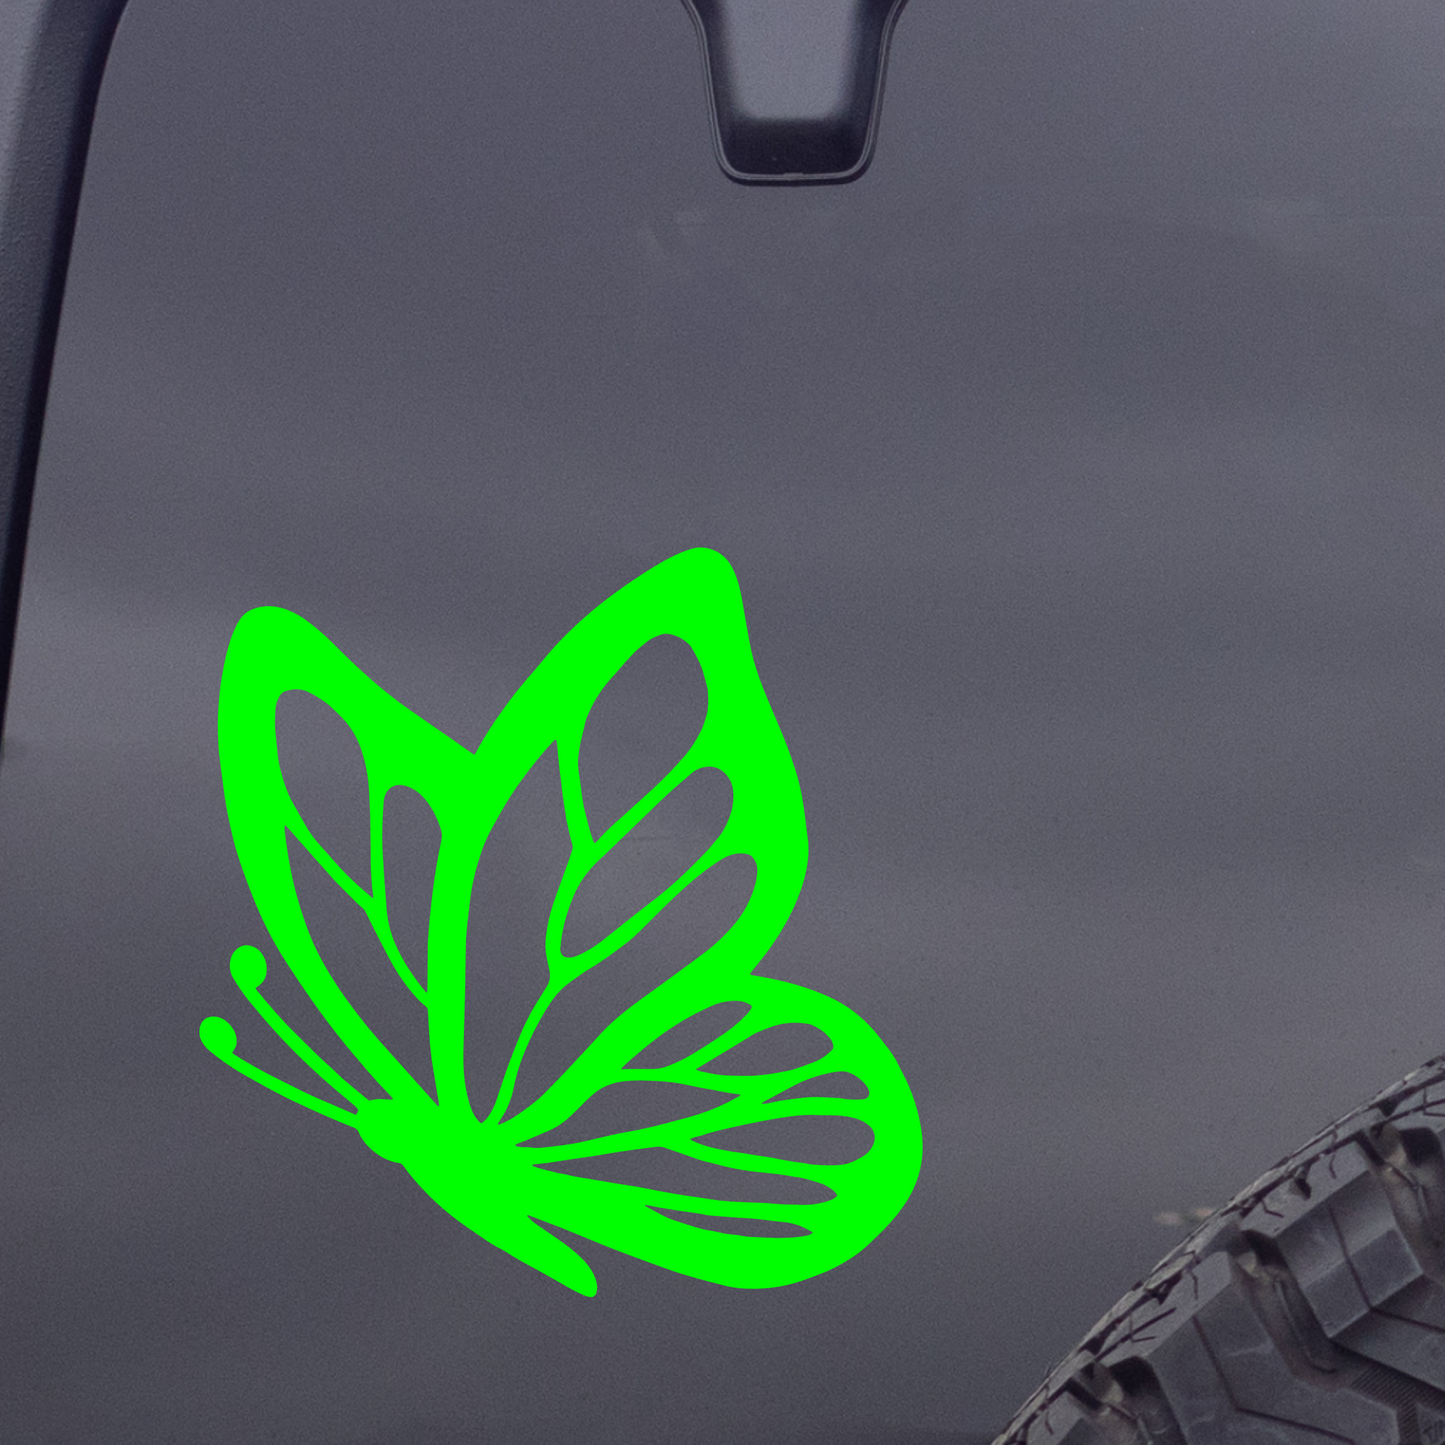 Butterfly Vinyl Decal Sticker, Side Butterfly Decal, Car Window Decal, Glassware/ Tumbler Decal